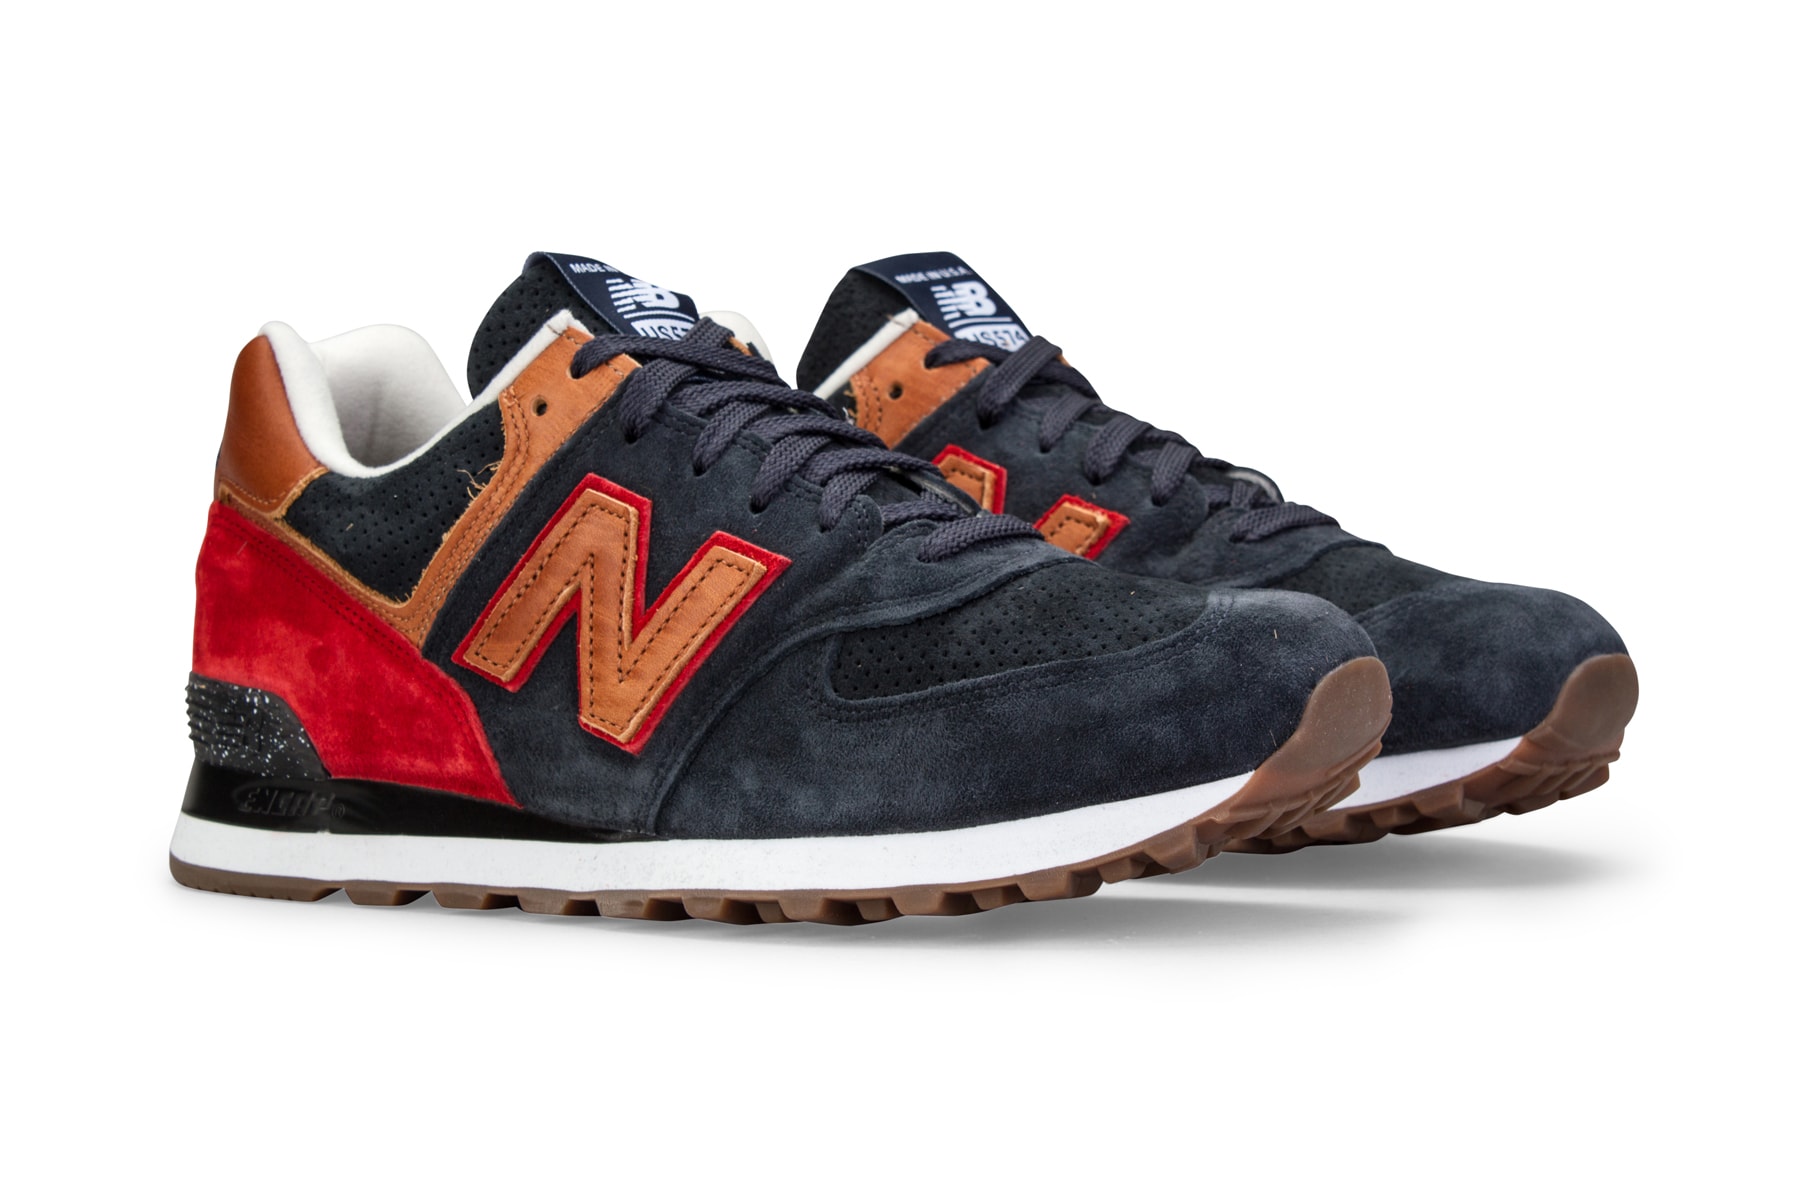 Francisco Lindor cleveland indians ss shortstop new balance 574 colors horween bc 12 red blue grey brown gold glove pepsi rawlings